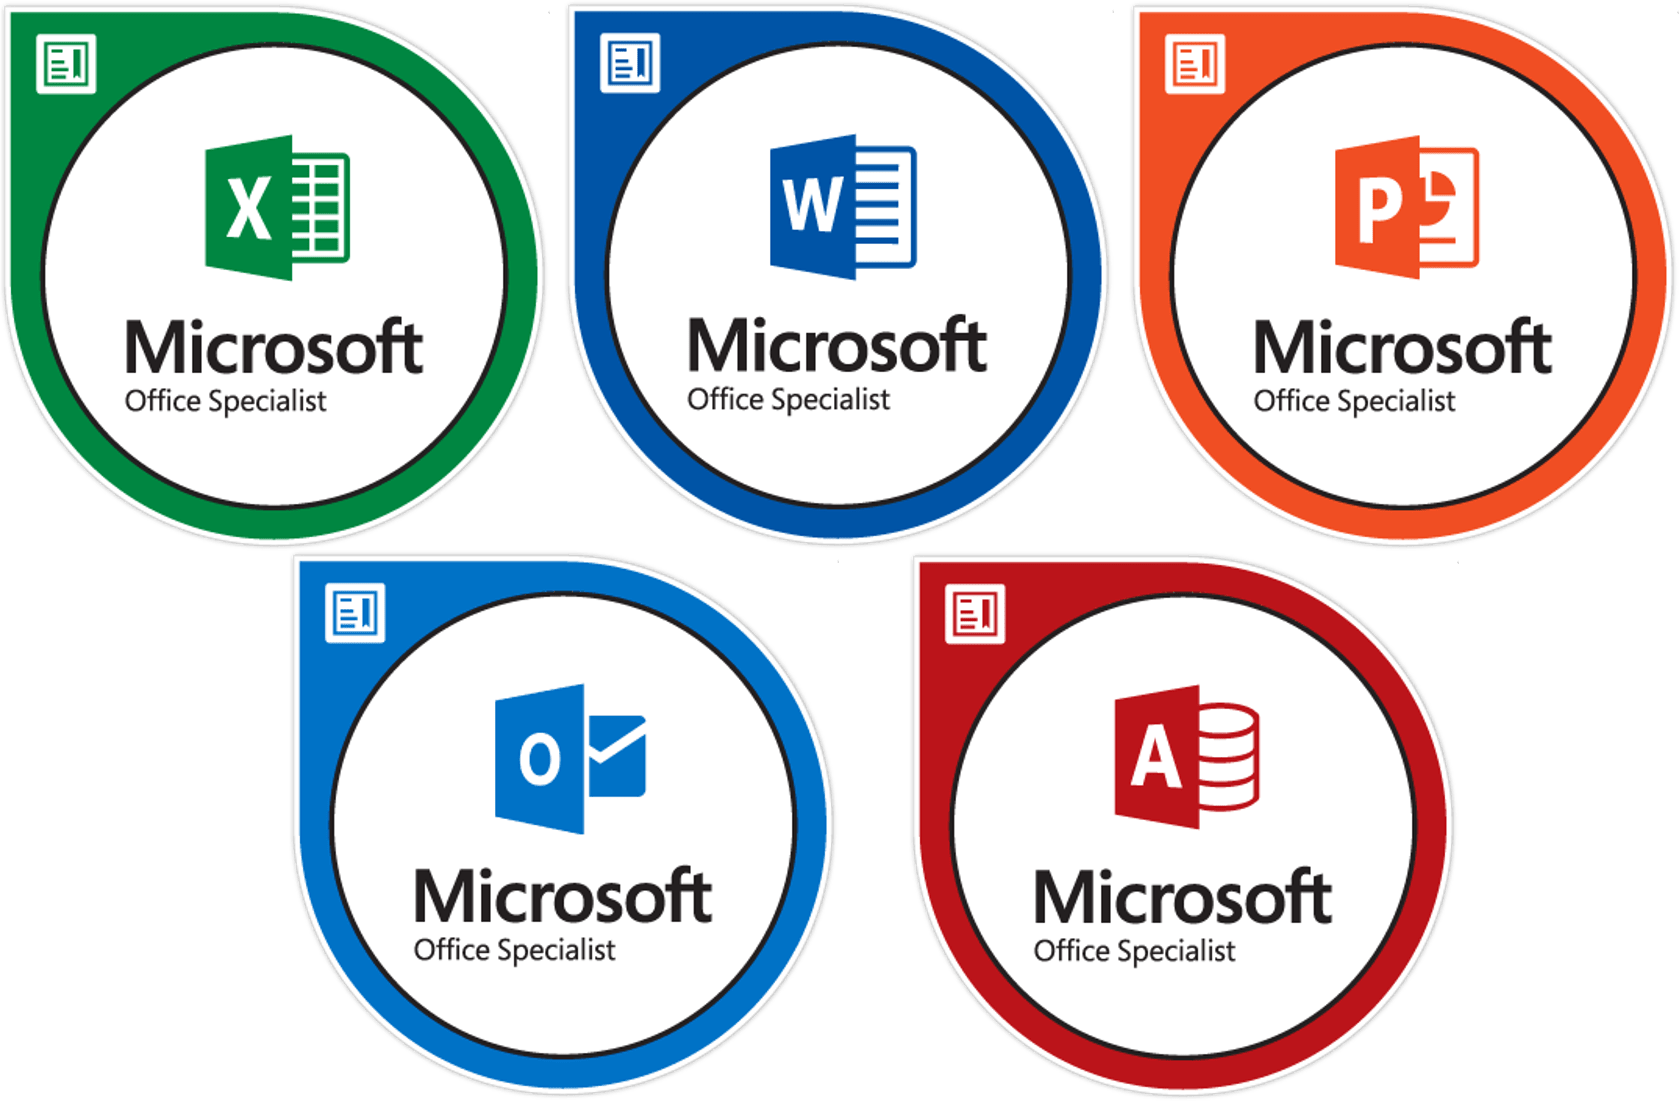 MO-101 – Microsoft Word Expert (Word and Word 2019)